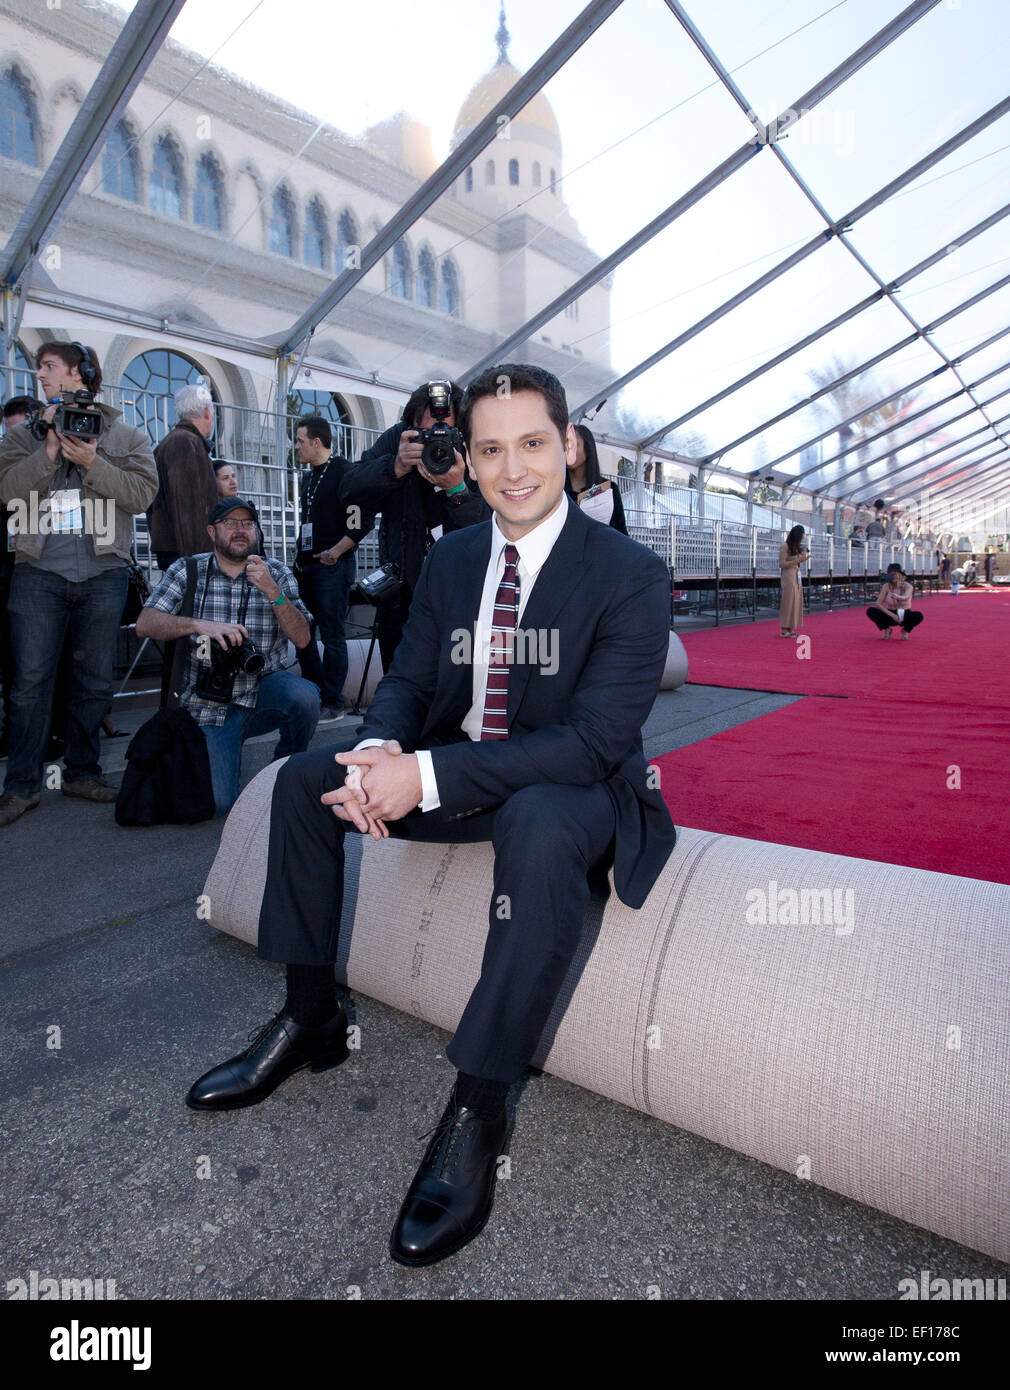 Los Angeles, California, USA. 24th Jan, 2015. American actor Matt McGorry poses for the news media after rolling out the red carpet on Saturday morning.----The 21st Annual 2015 Screen Actors Guild Awards preparations were underway at the Shrine Auditorium in Los Angeles as workers set up tents, stages, bleachers and displays on Saturday. American actor Matt McGorry, 'Orange is the New Black' nominee, led the ceremonial rolling out of the red carpet with Local 33 Props and Carpenters, Local 800, Art Directors as well as Sag Award Comittee Vice Chair Daryl Anderson and American actor Woody Sch Stock Photo